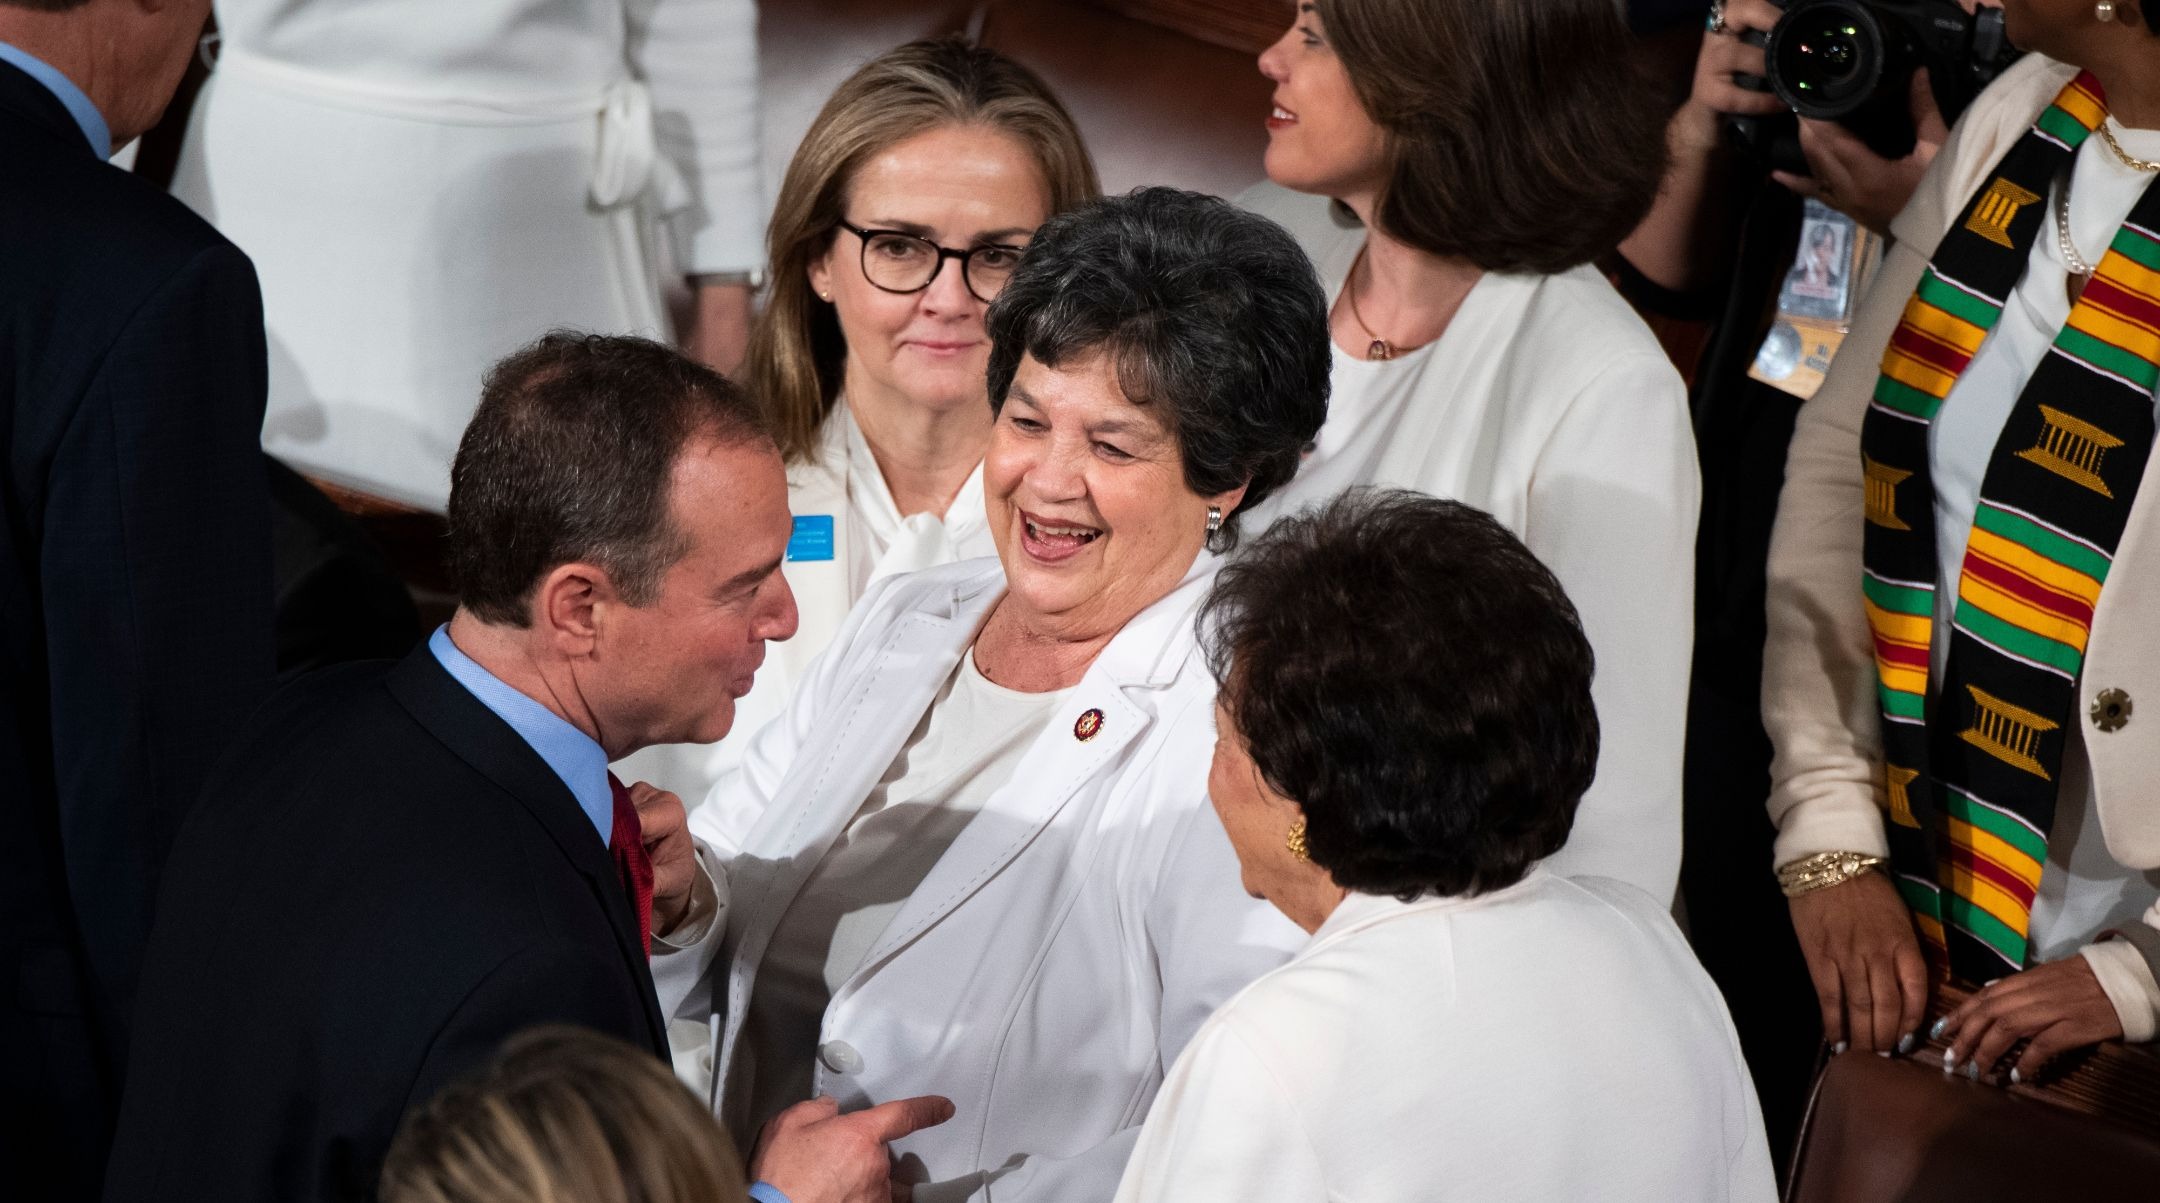 Rep. Lois Frankel, D-Fla. (center) joins colleagues on the floor of the House before President Donald Trump’s State of the Union address, Feb. 4, 2020. (Tom Williams/CQ-Roll Call, Inc via Getty Images)